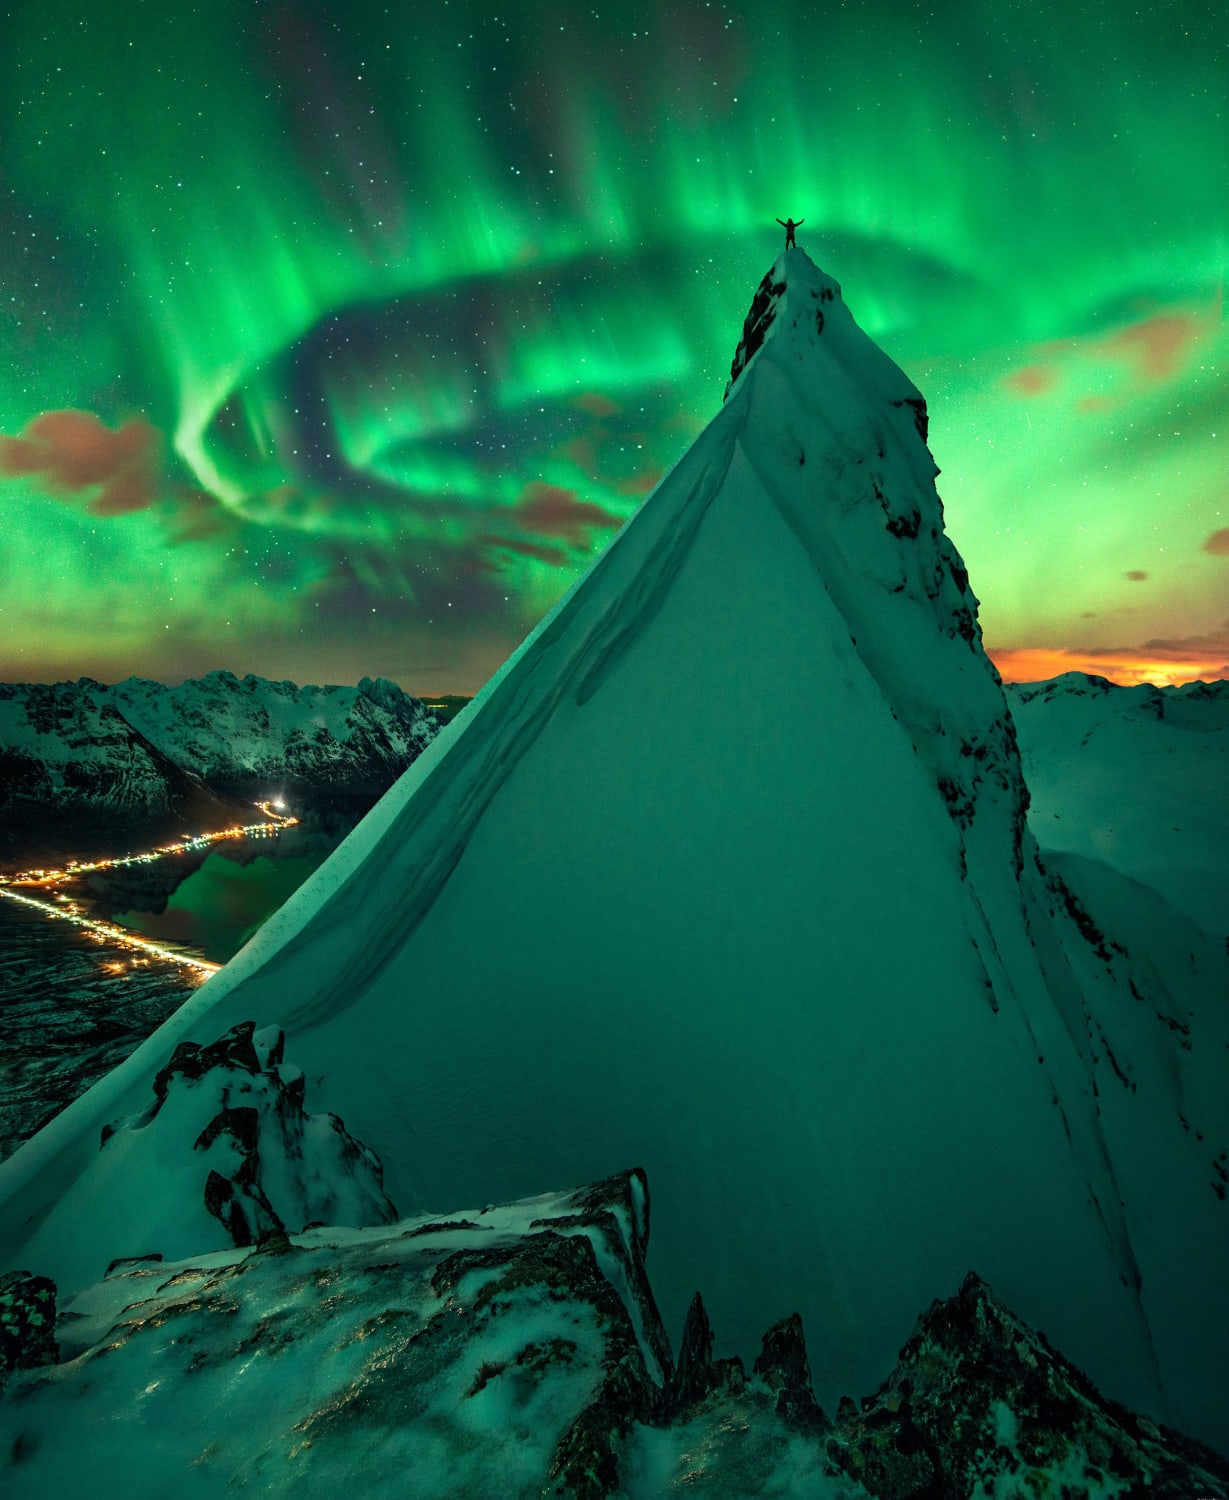 Aurora over Norway. Notice someone standing on the peak with the best view.